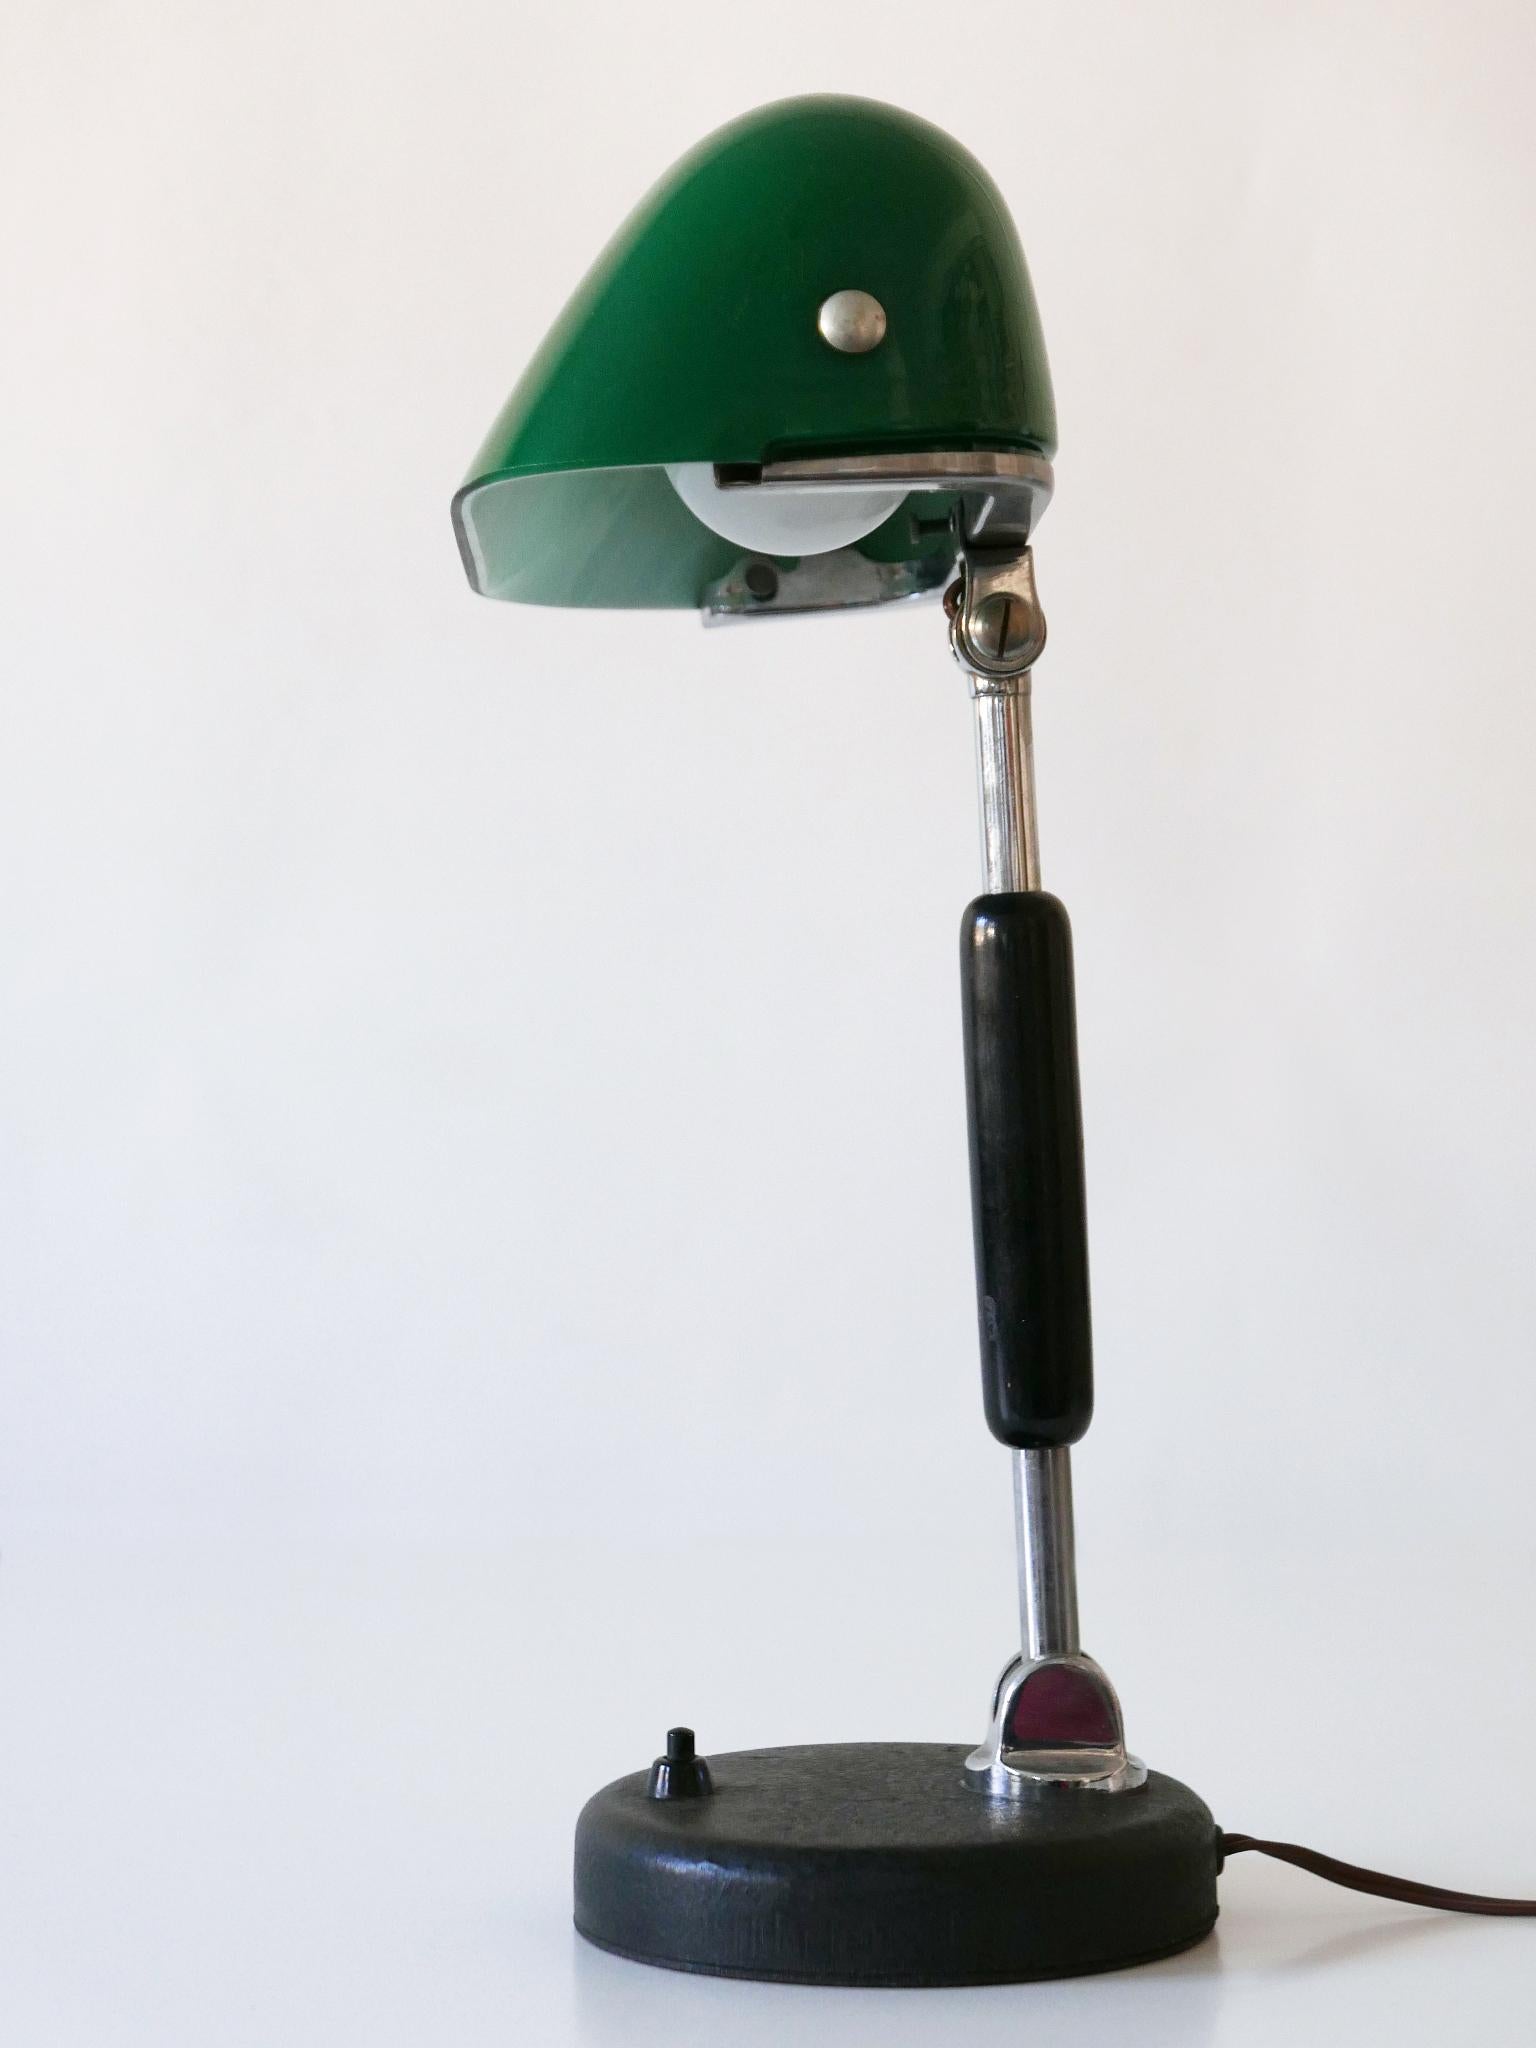 Mid-20th Century Exceptional Bauhaus Bankers Table Lamp with Original Green Glass, 1930s, Germany